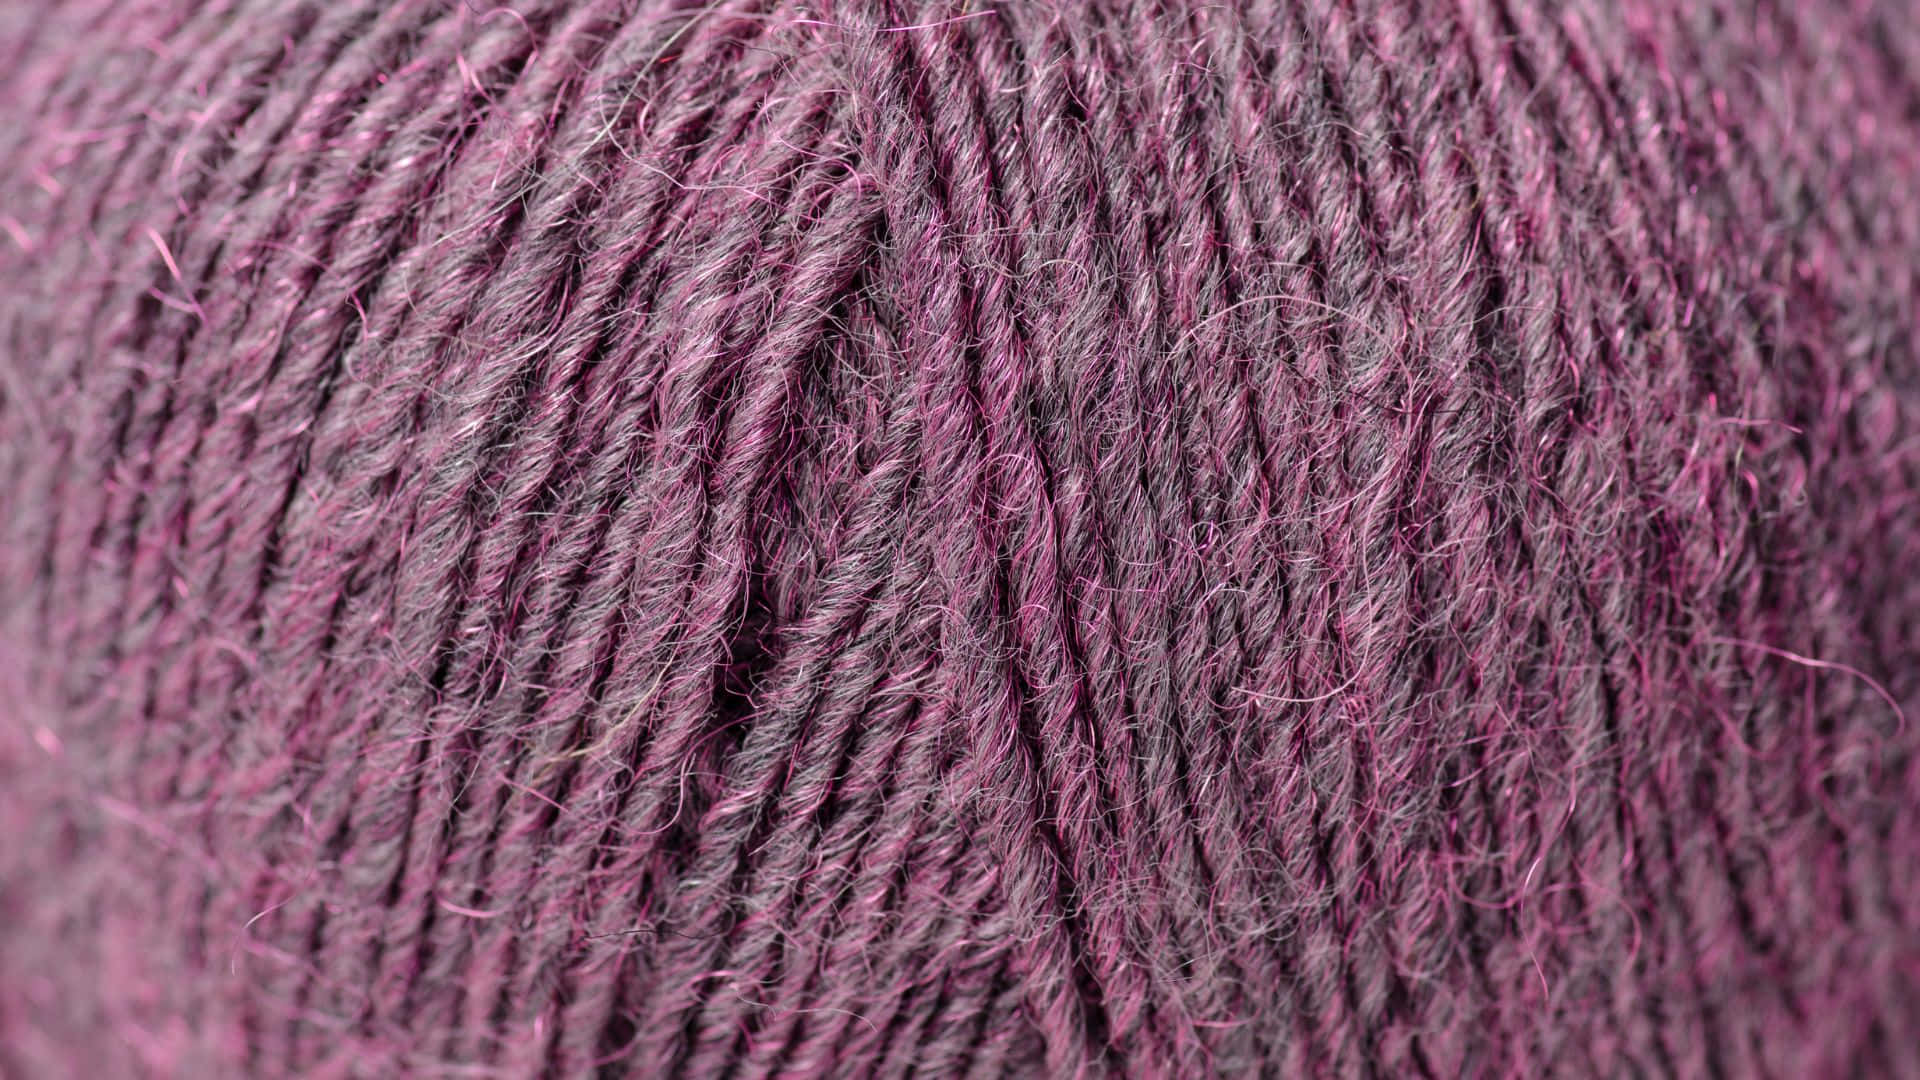 Bright and Fluffy Shades of Purple Wool Wallpaper